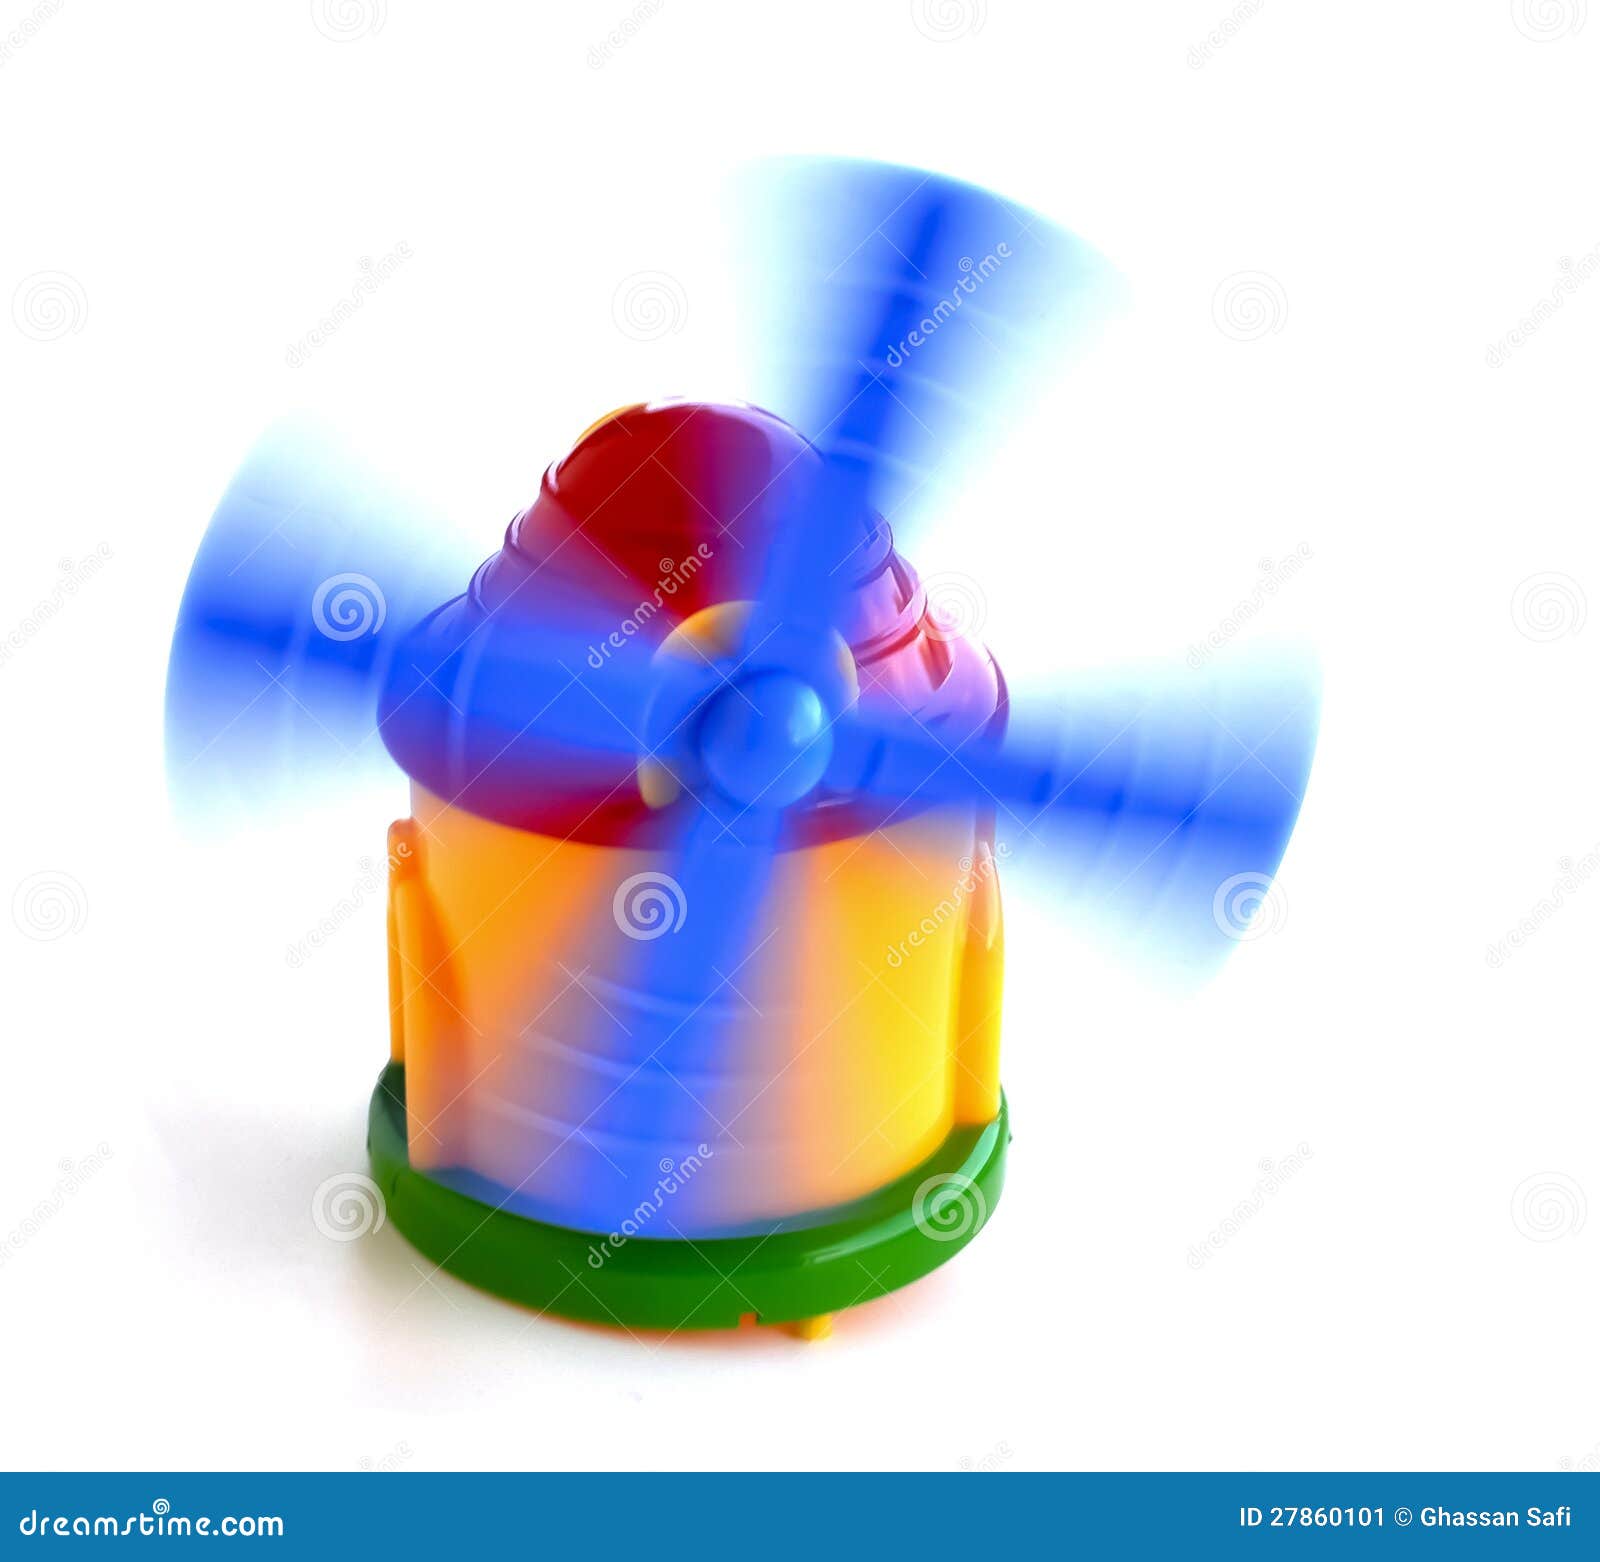 Toy Windmill In Motion Stock Image - Image: 27860101